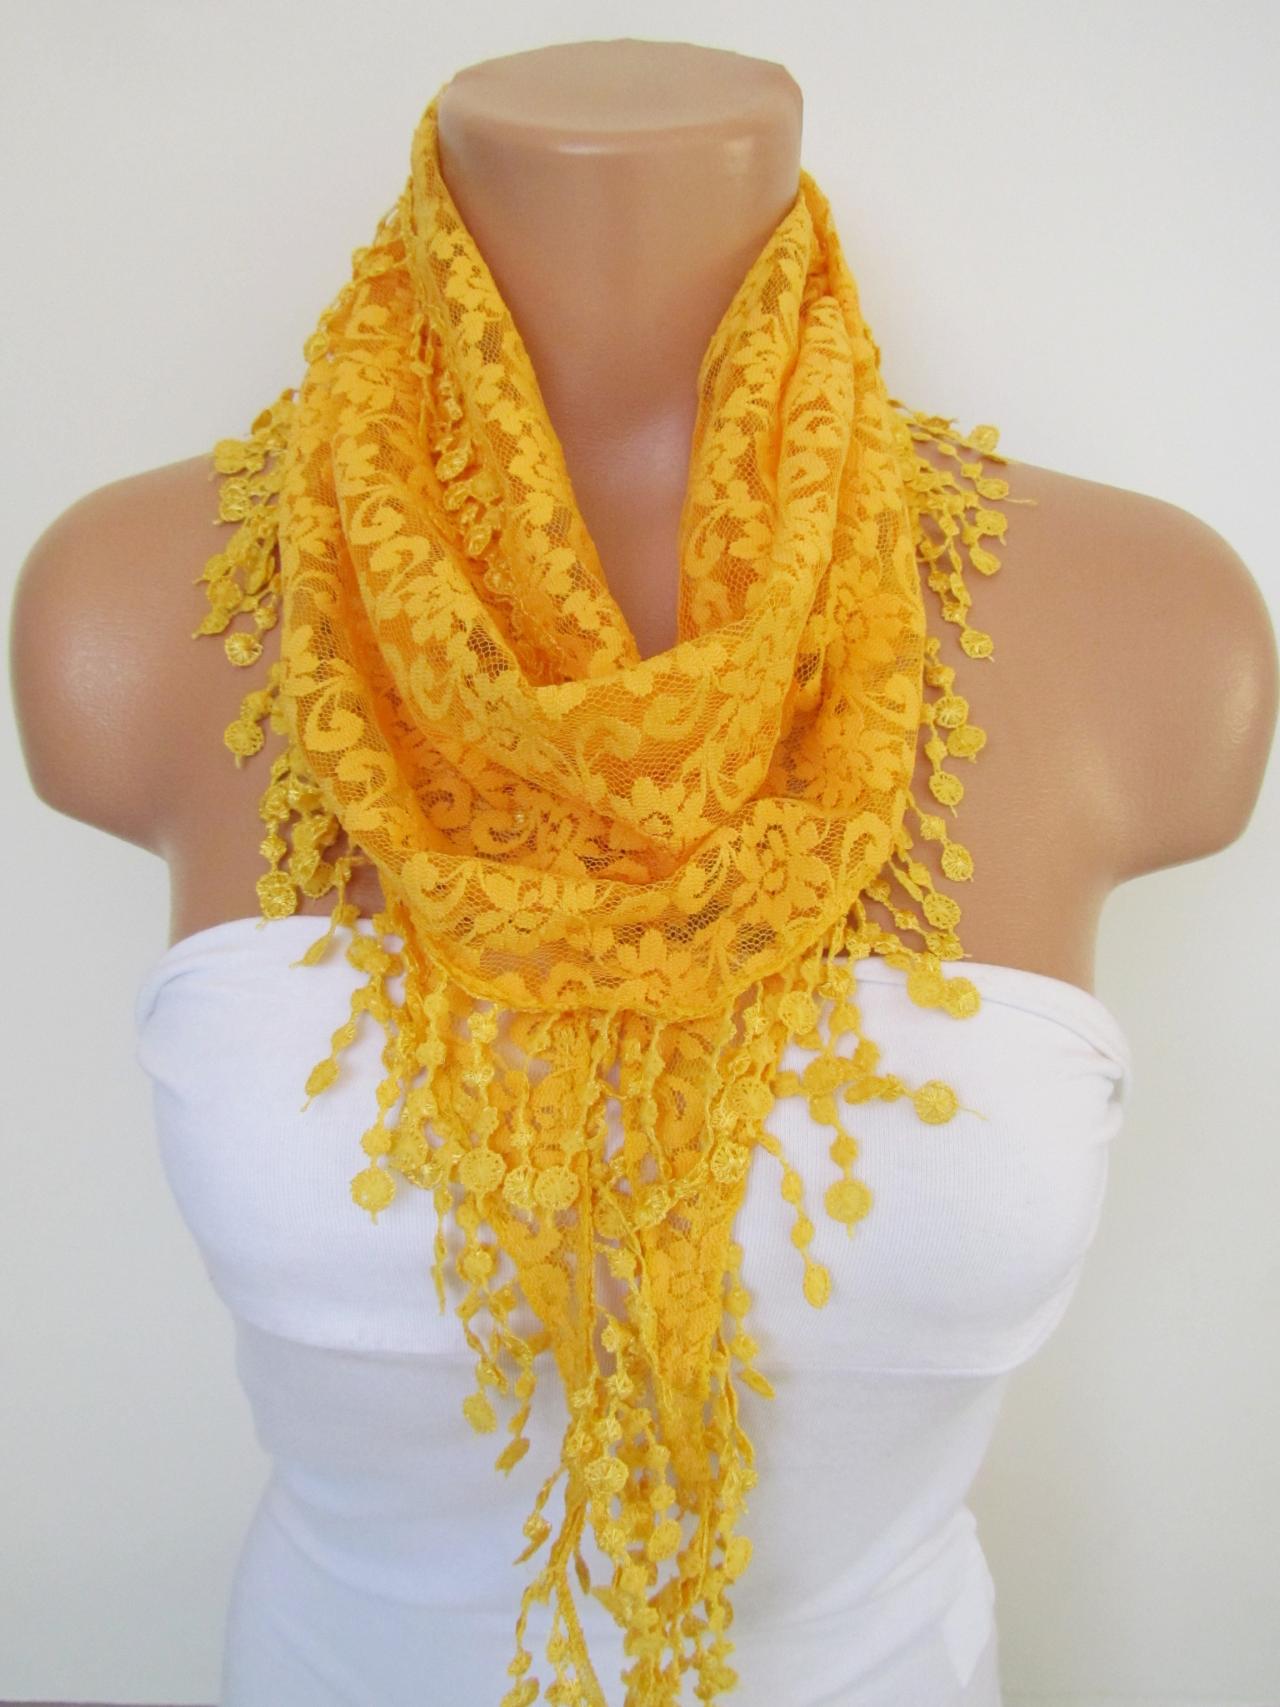 Yellow Long Scarf With Fringe-Winter Fashion Scarf-Headband-Necklace- Infinity Scarf- Winter Accessory-Long Scarf